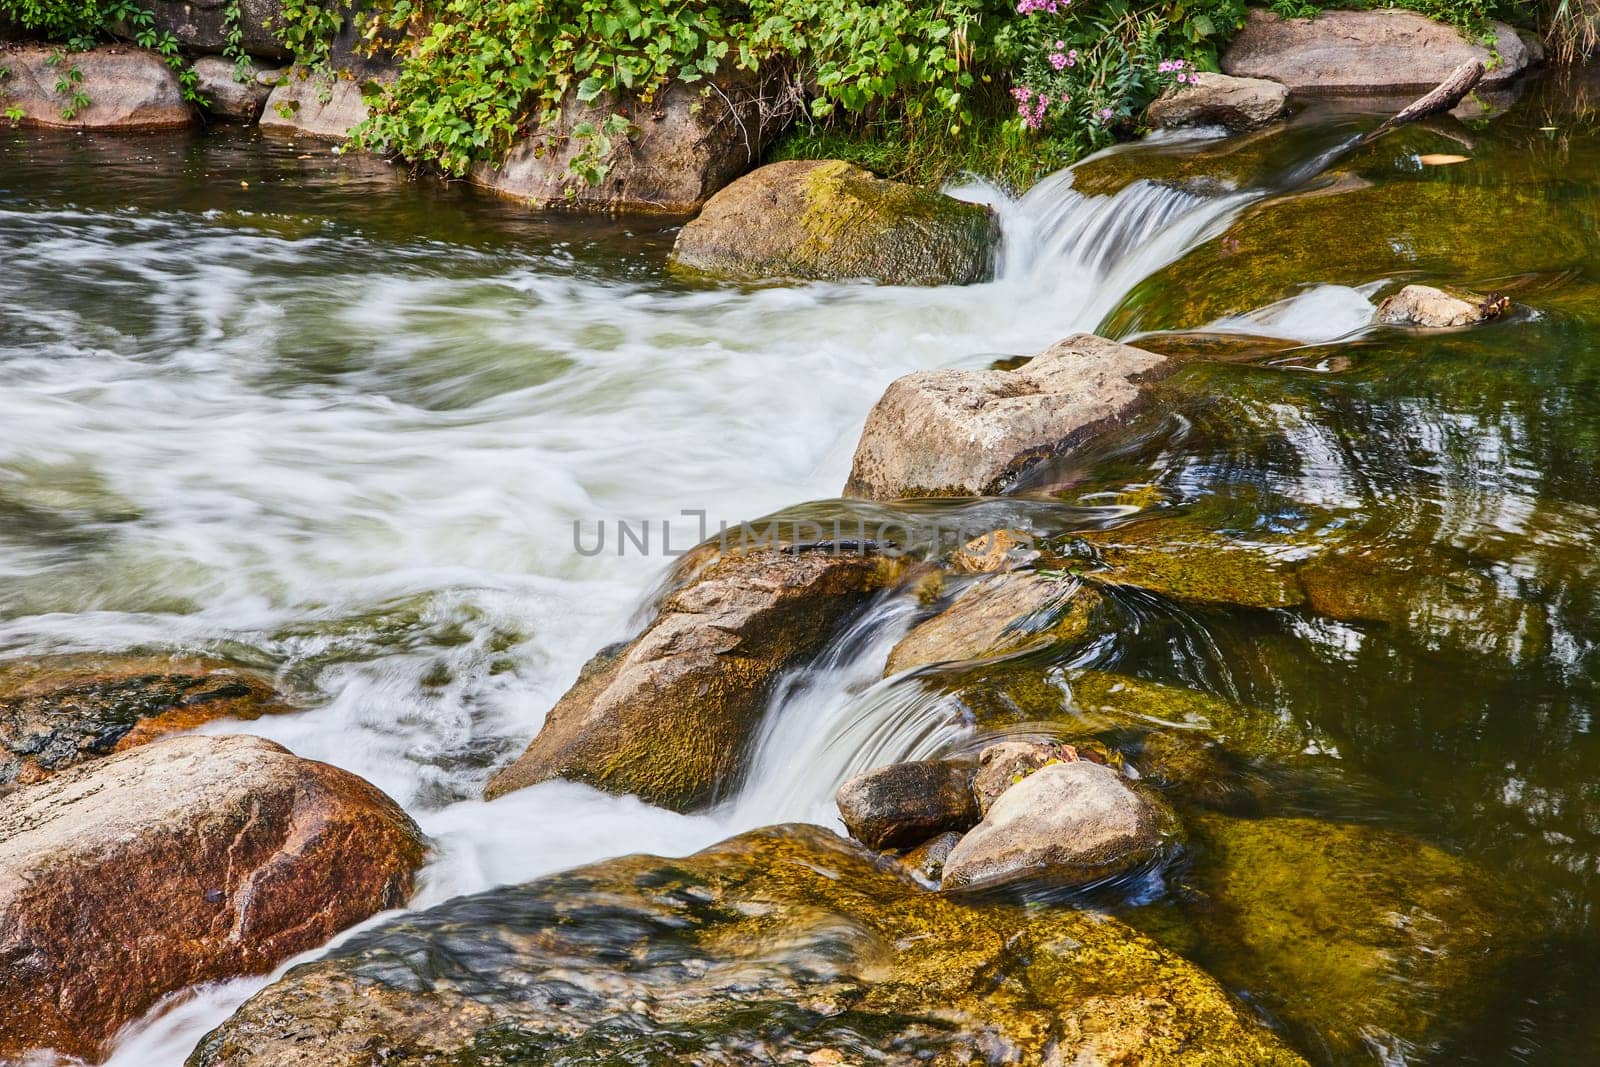 Tranquil Waterfall in Lush Forest - Eye Level View by njproductions